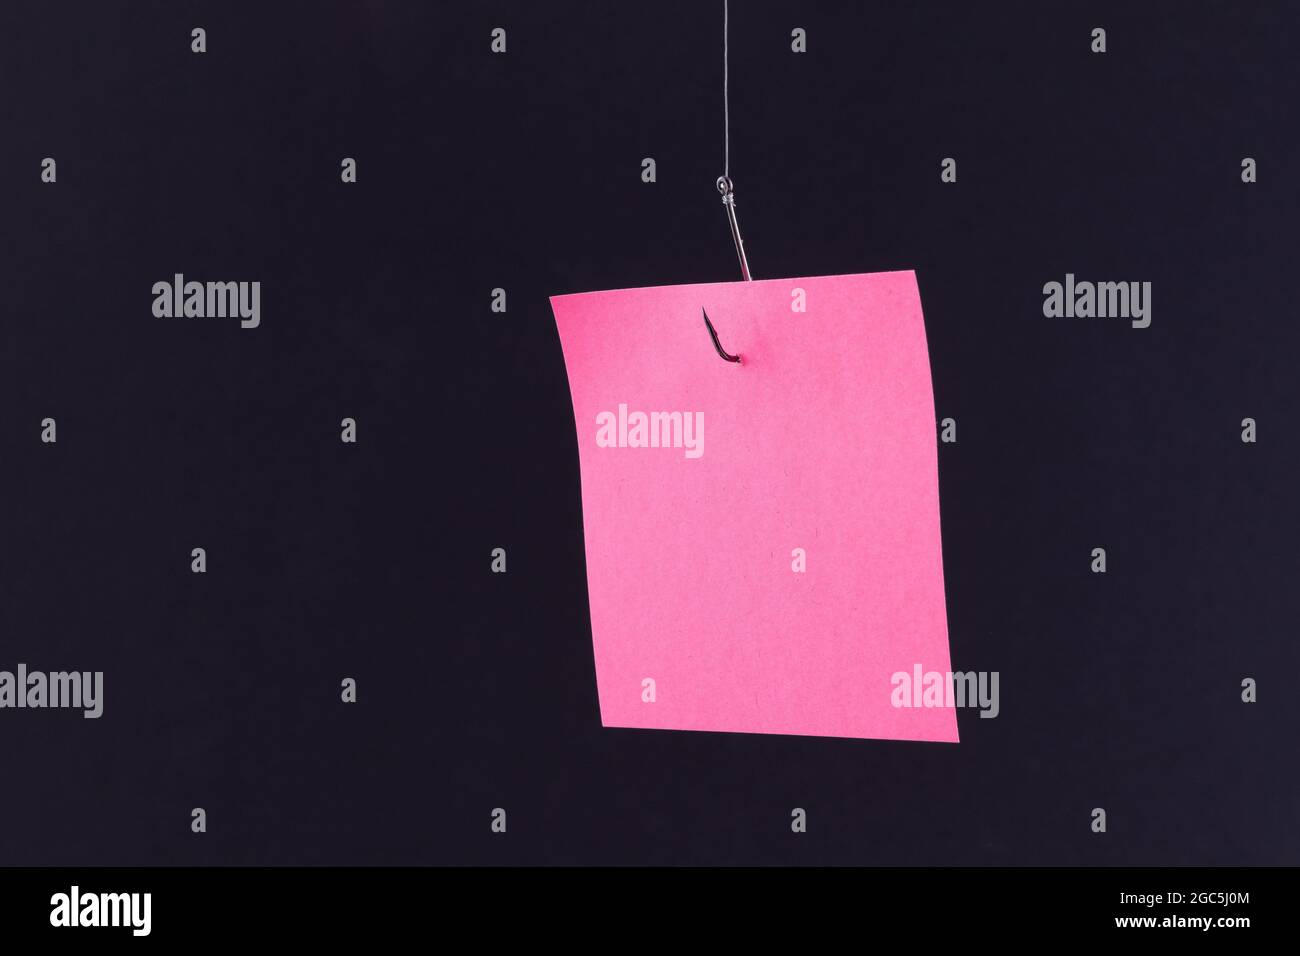 https://c8.alamy.com/comp/2GC5J0M/mockup-of-a-blank-pink-memo-paper-with-copy-space-hanging-on-a-fishing-hook-against-the-black-background-reminder-or-to-do-list-sticky-note-template-2GC5J0M.jpg